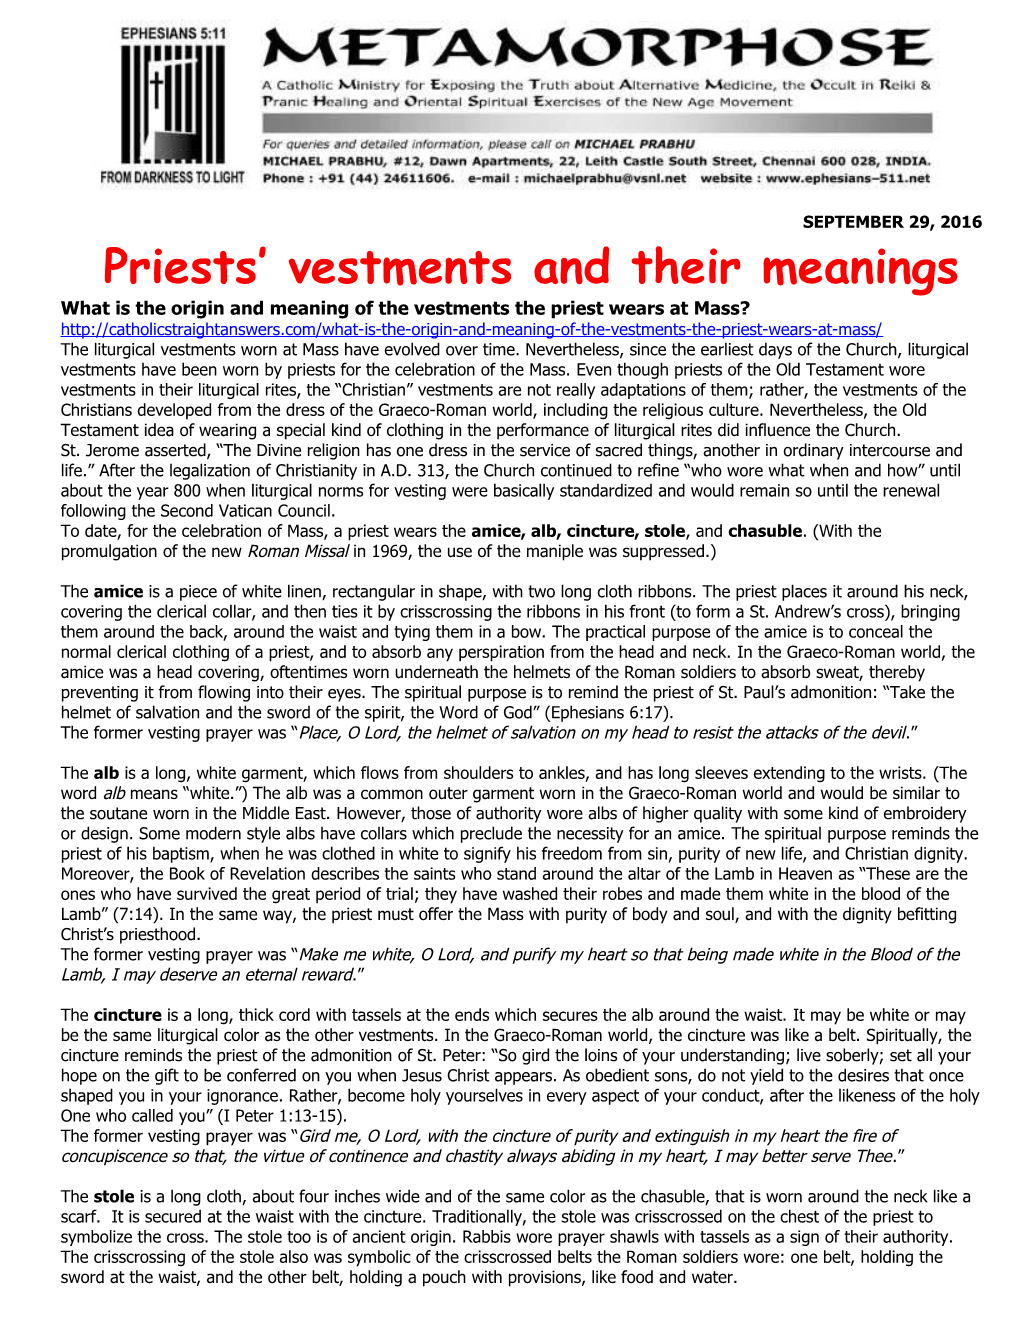 What Is the Origin and Meaning of the Vestments the Priest Wears at Mass?